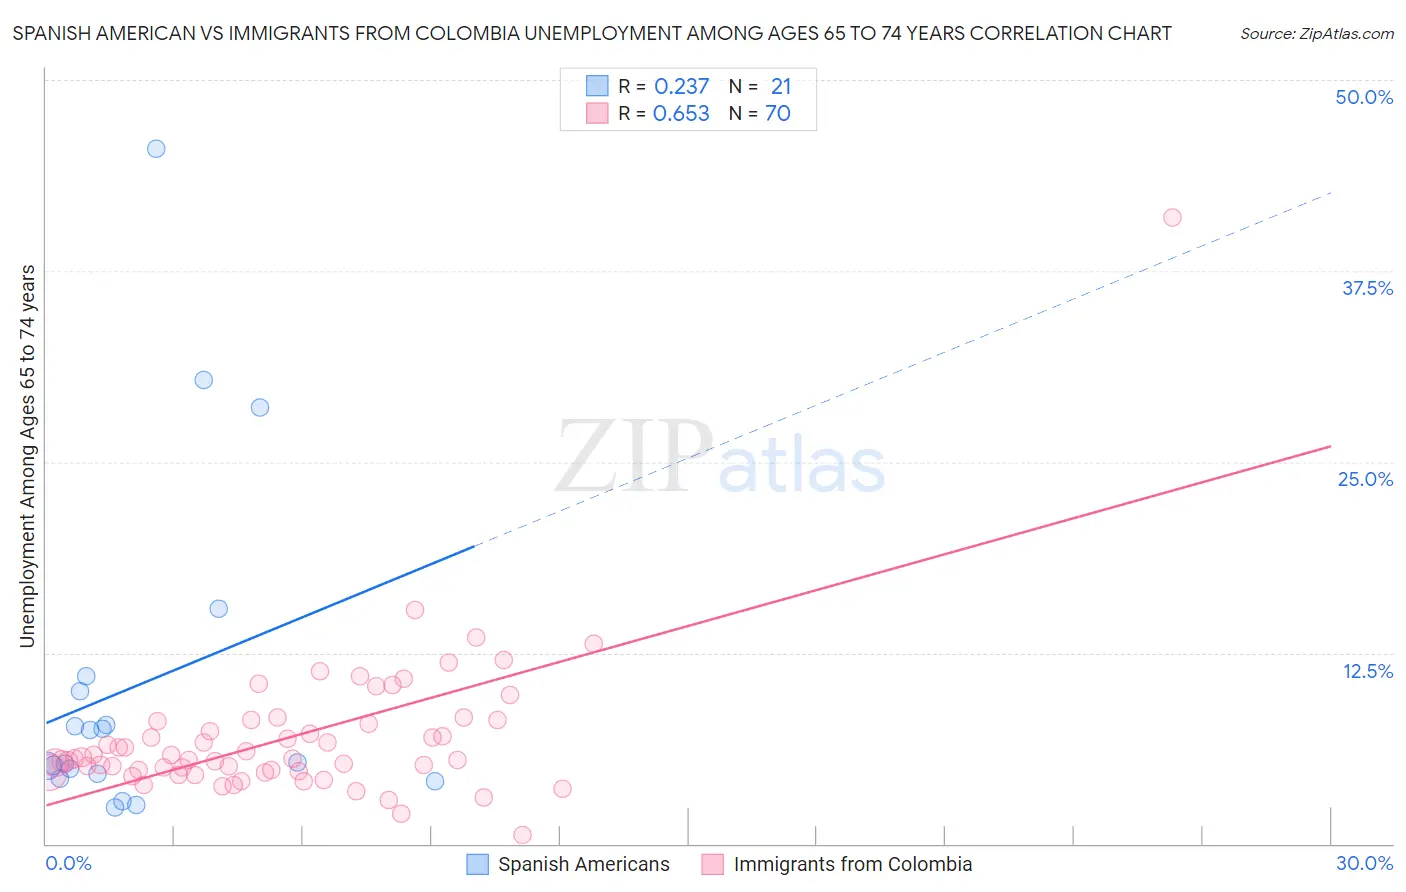 Spanish American vs Immigrants from Colombia Unemployment Among Ages 65 to 74 years